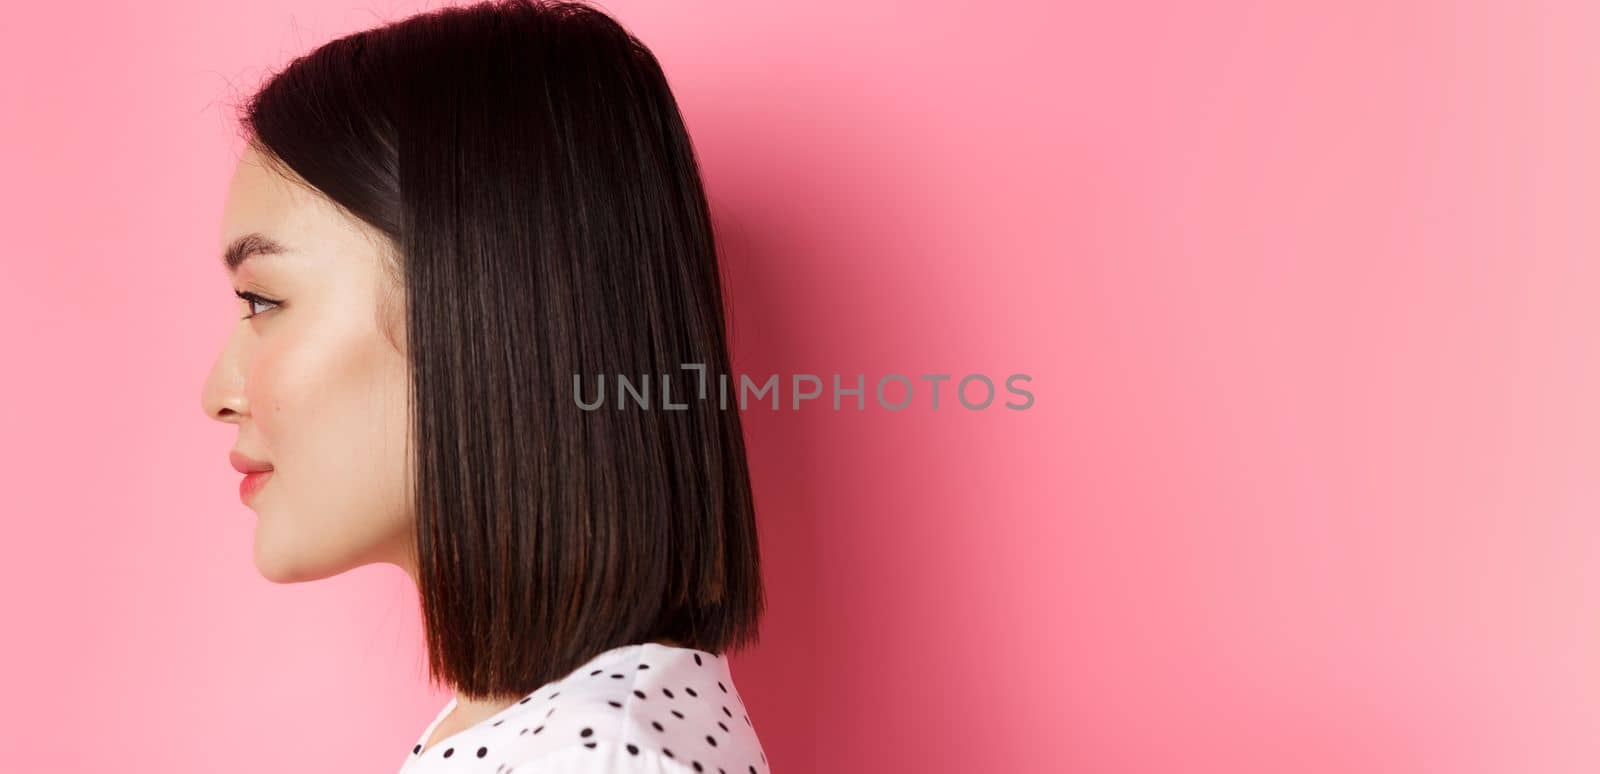 Beauty and skin care concept. Headshot profile of young beautiful asian woman with short dark hair, looking left at copy space, standing over pink background.